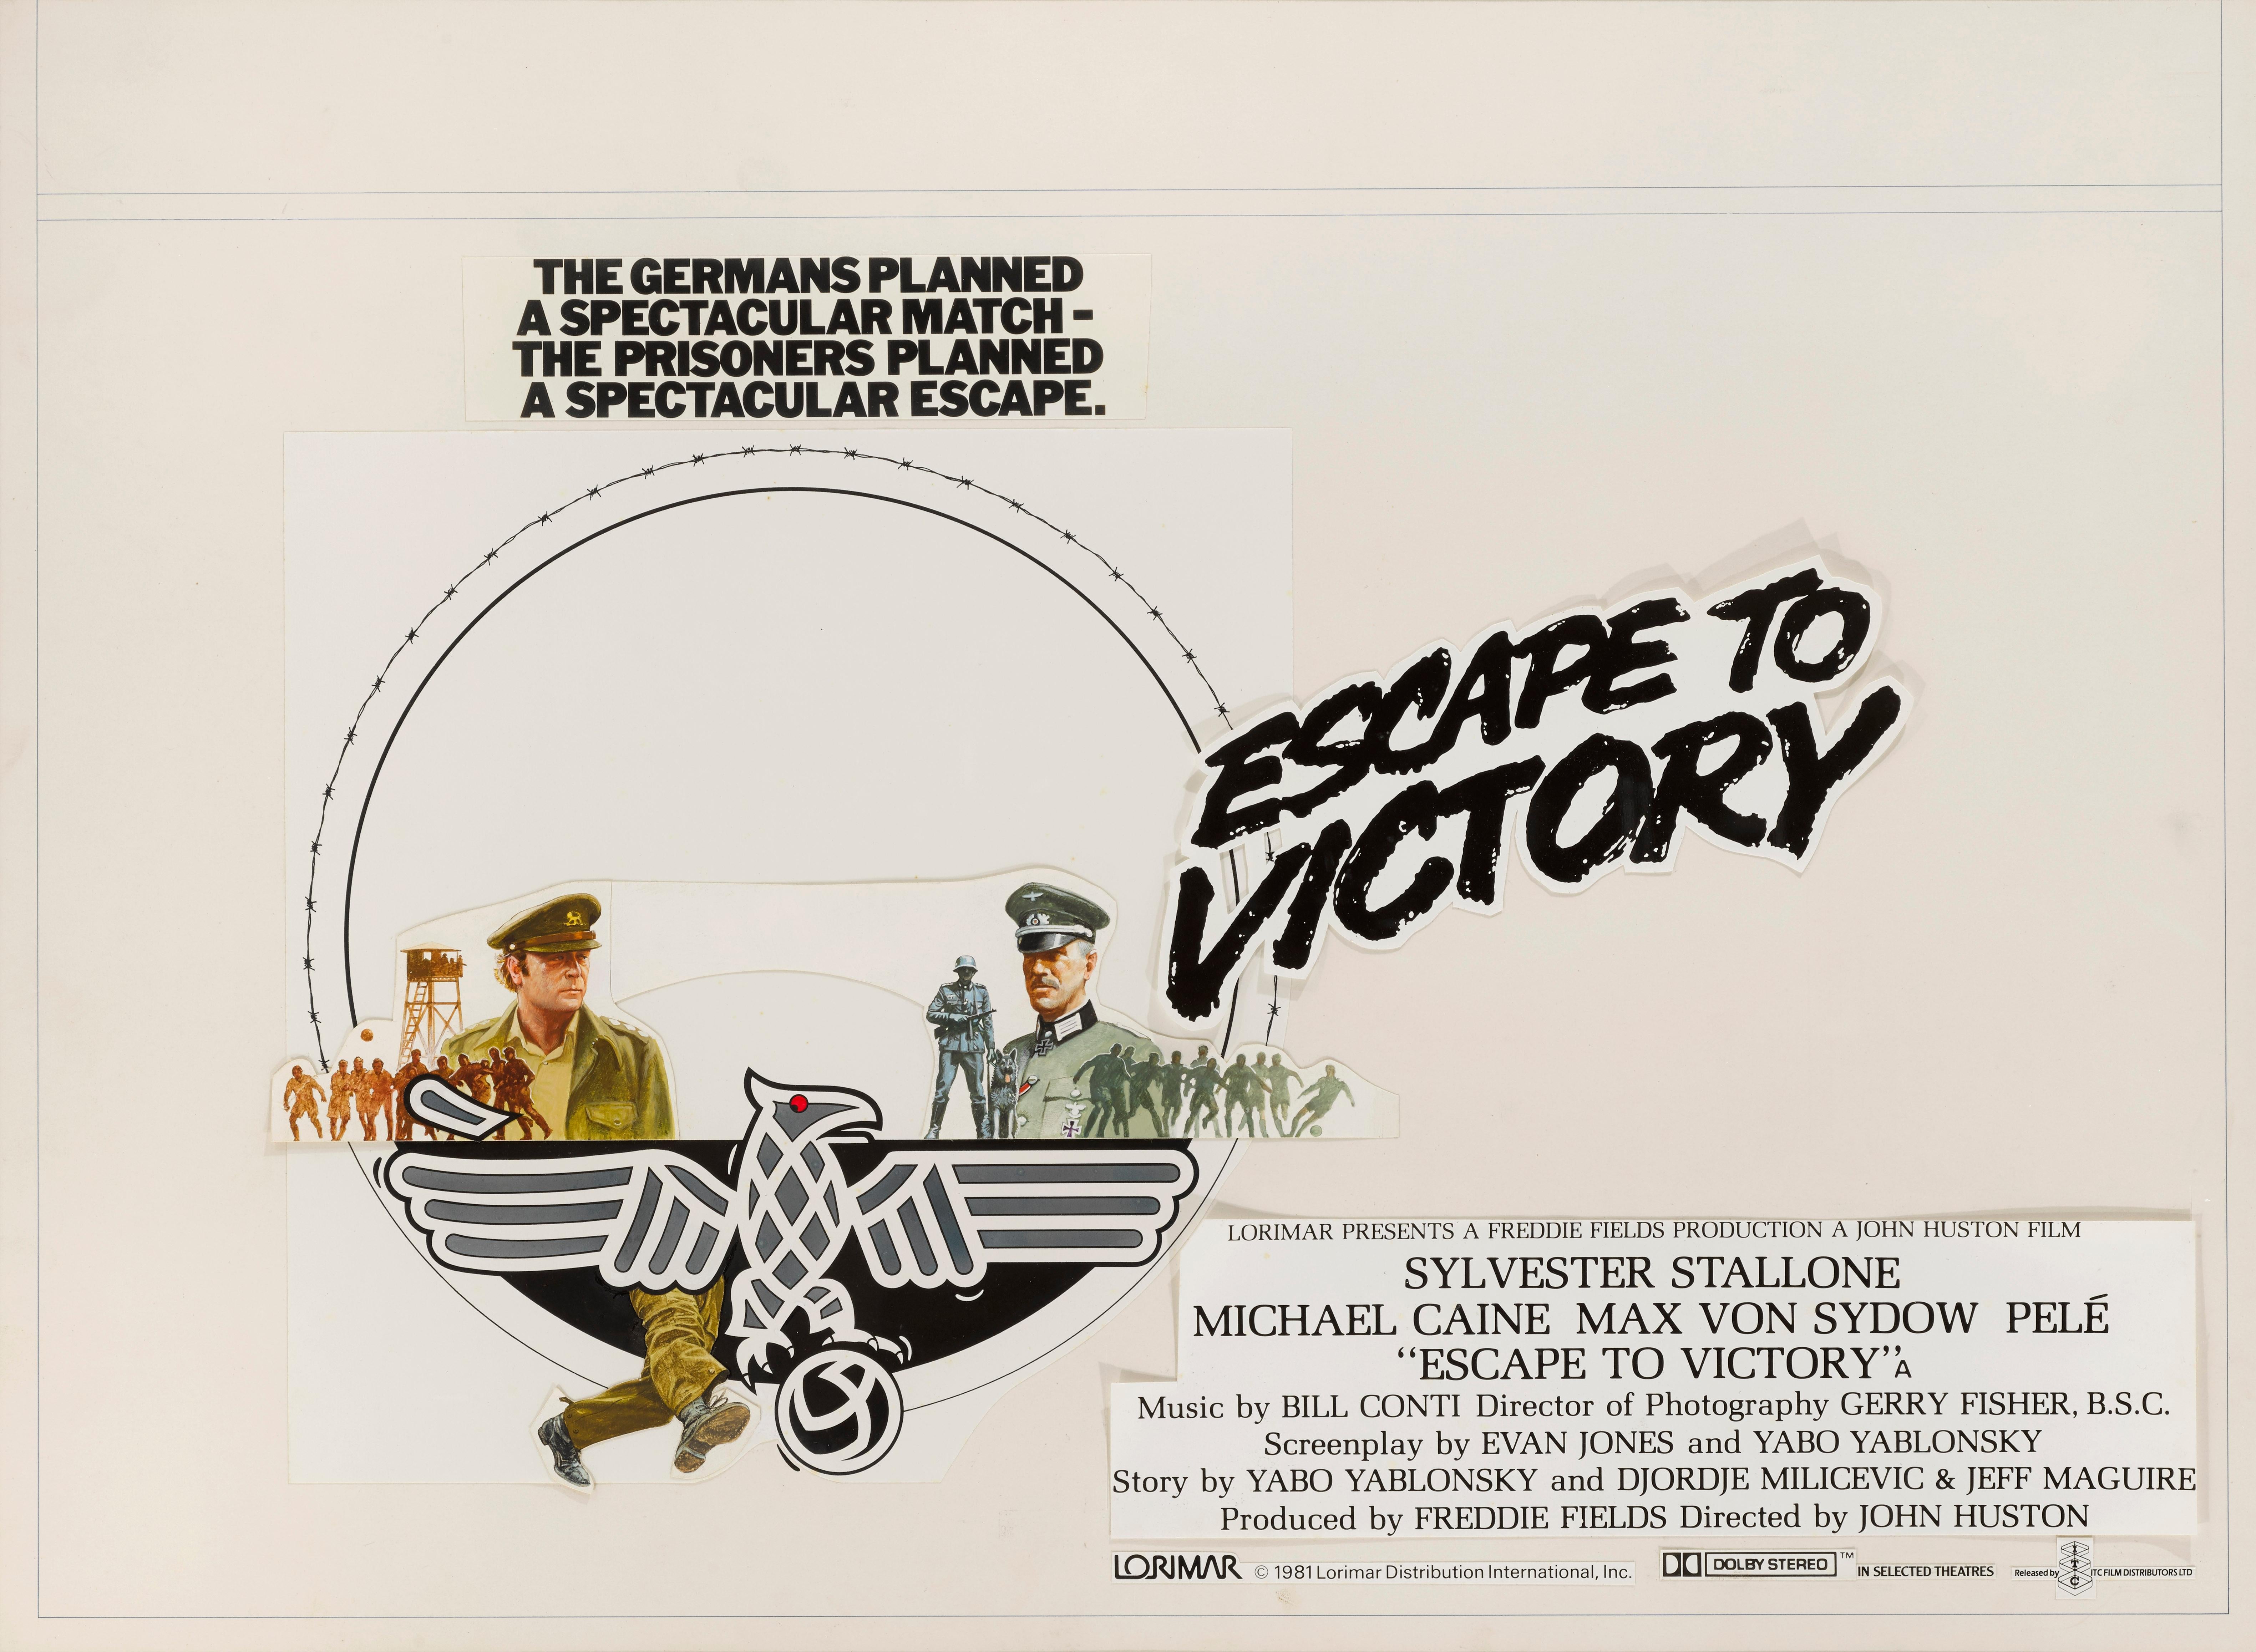 This is a unique original artwork mixed-media on art board used to create the British 30 x 40 inch film poster for the 1981 film Escape to Victory. This war film was directed by John Huston and stars Sylvester Stallone, Michael Caine, Pelé and Bobby